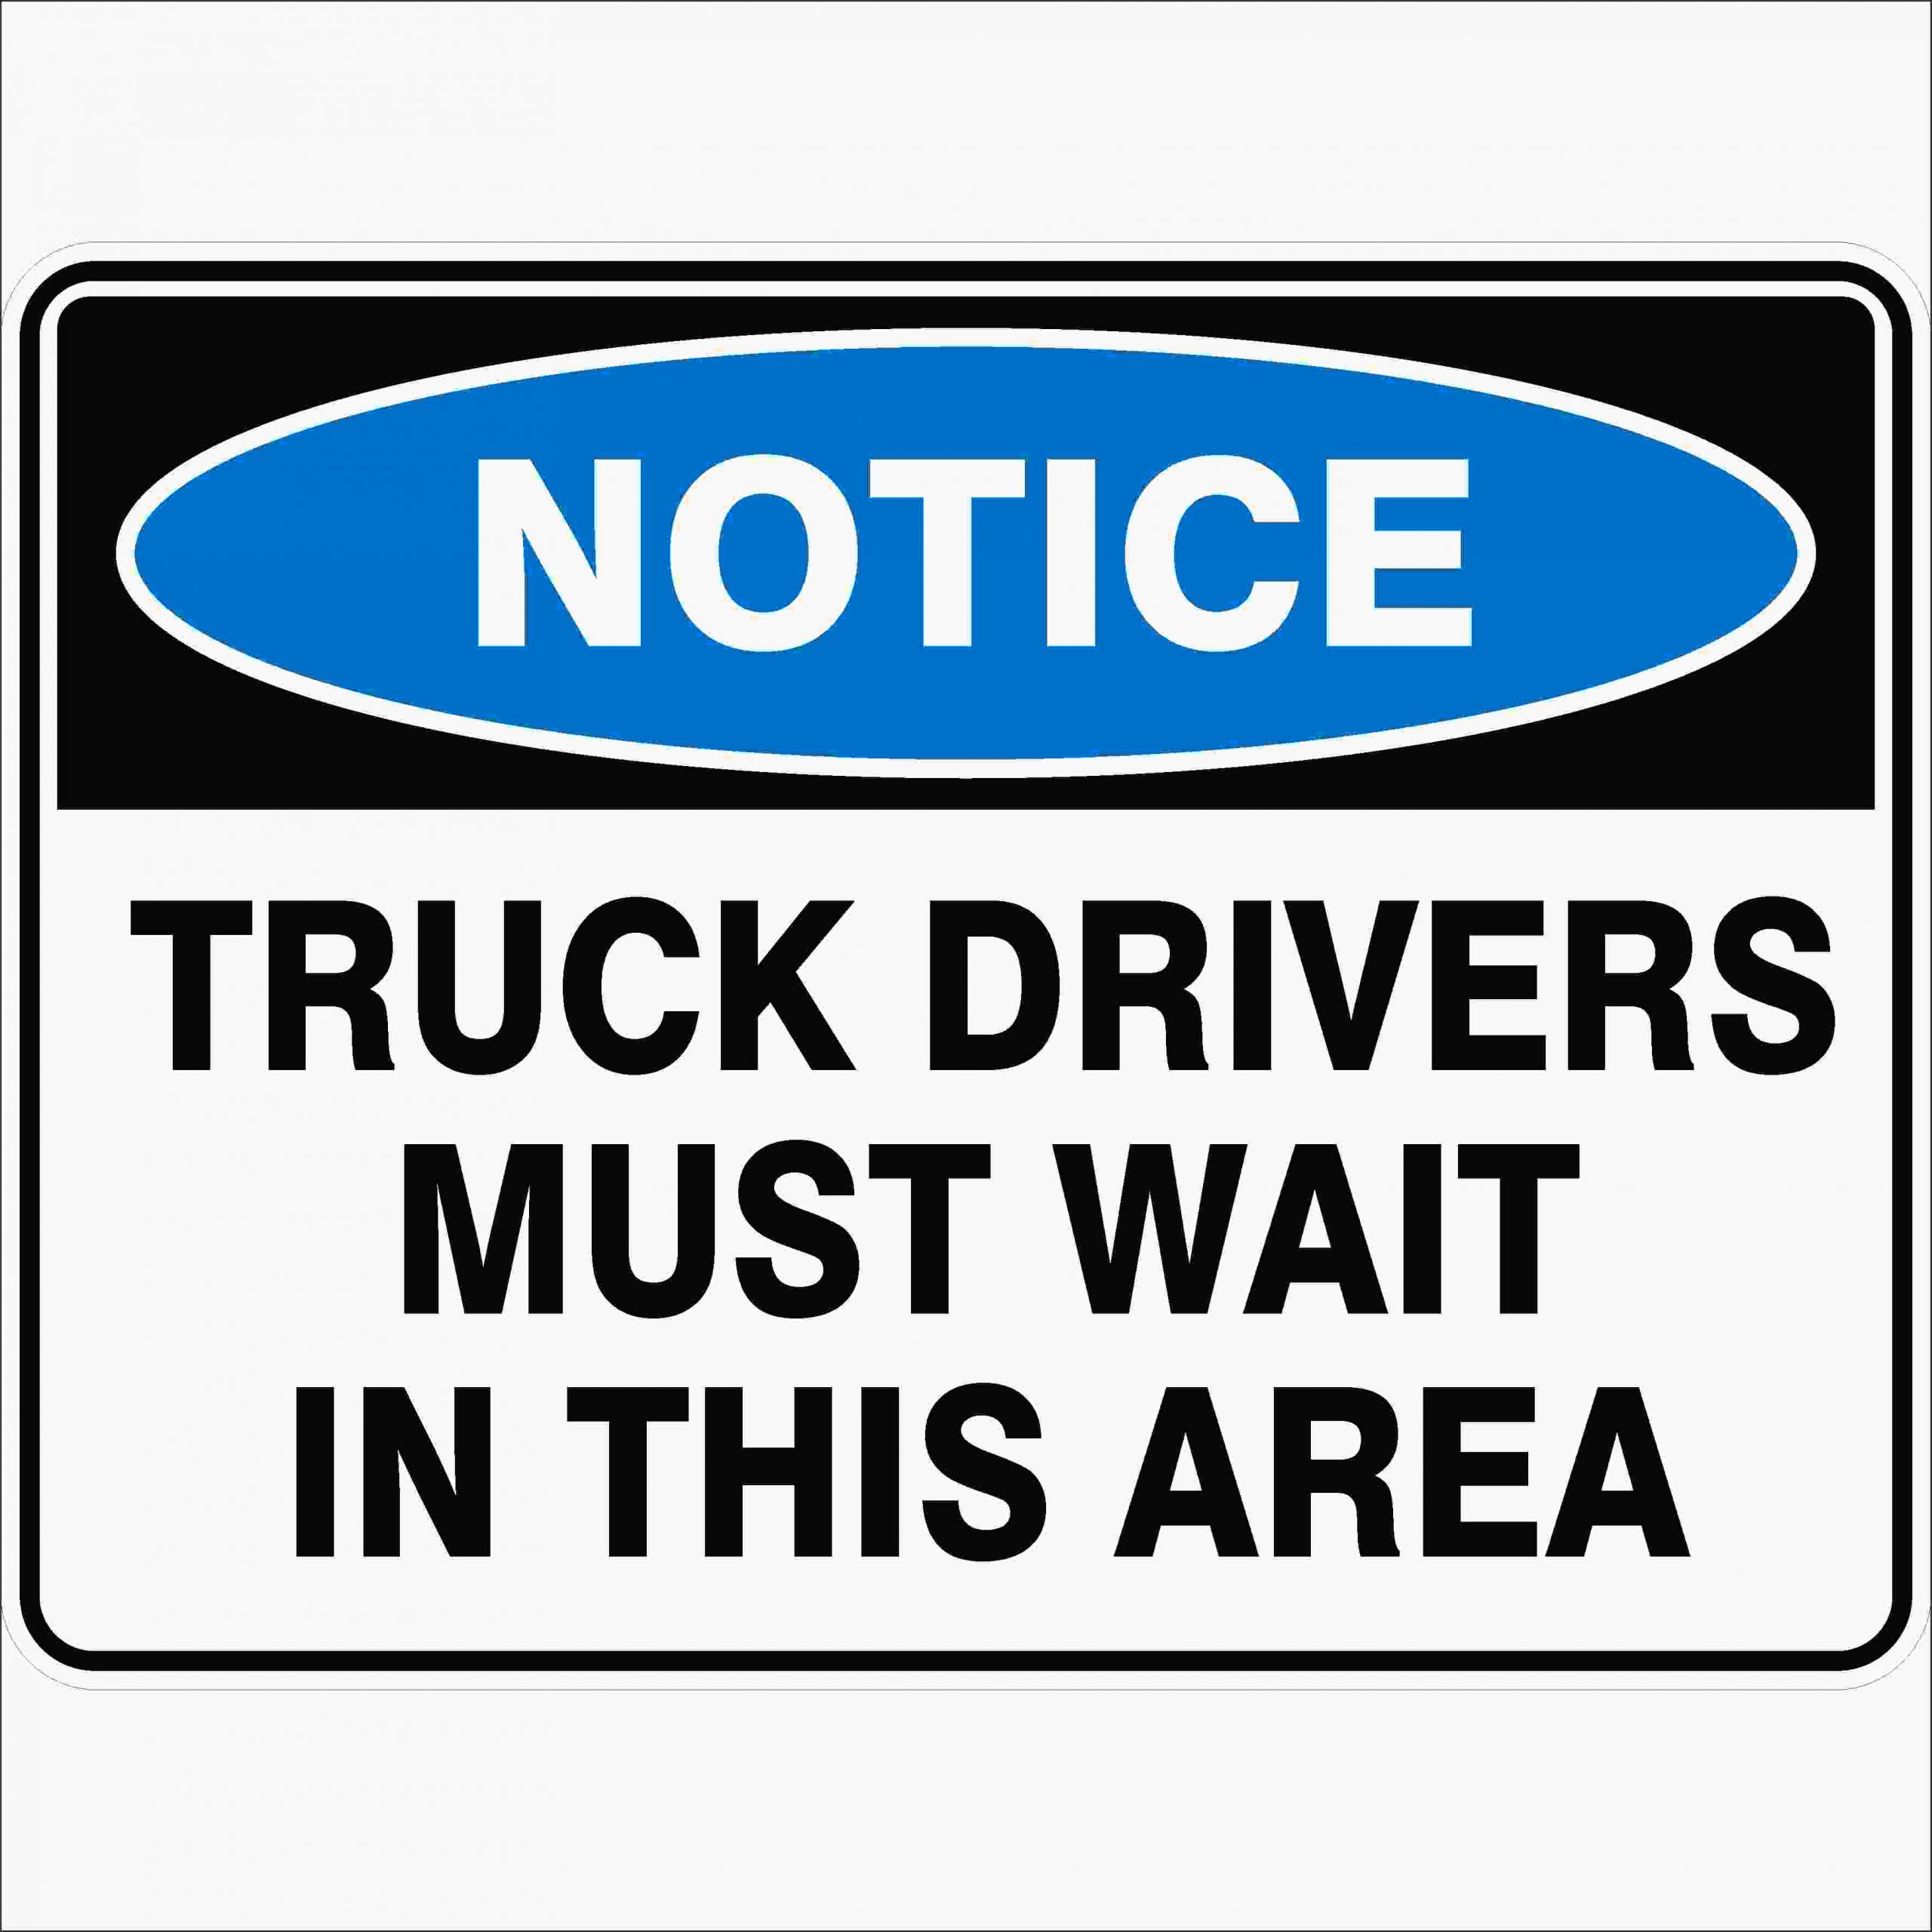 Notice - Truck Drivers Must Wait In This Area - Safety Sign